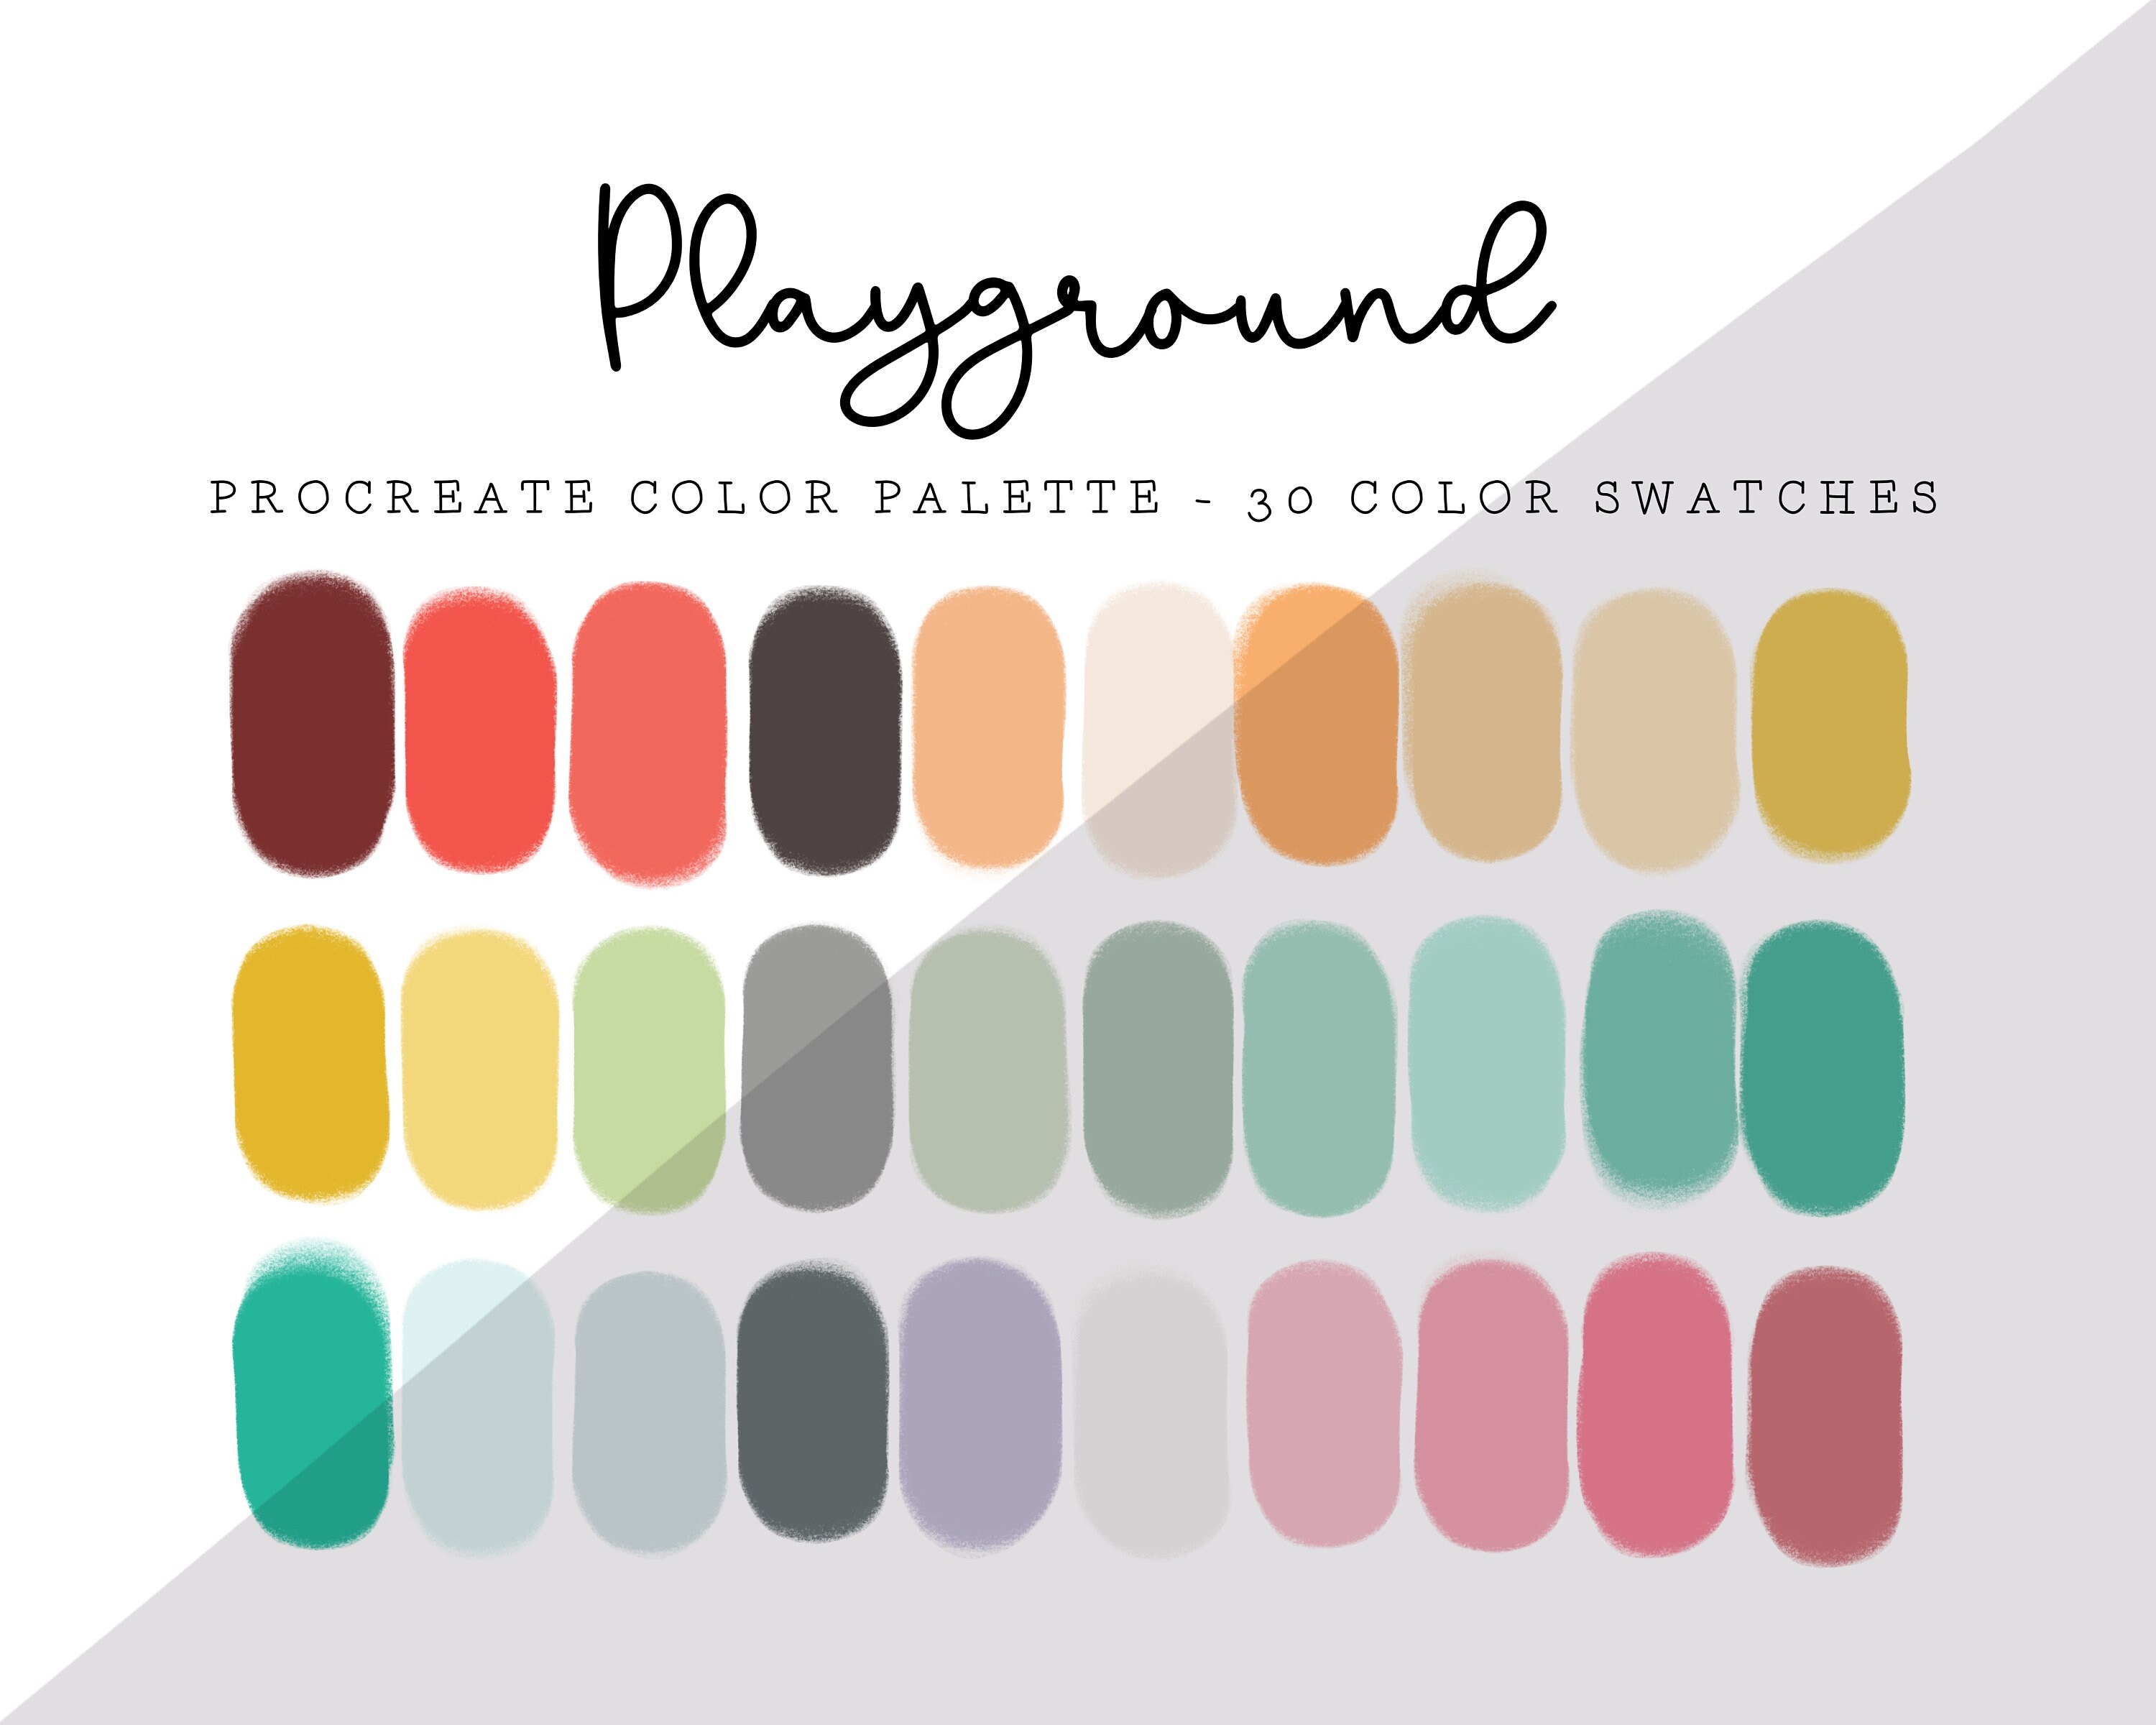 Playground Procreate Color Palette Color Swatches iPad - Etsy